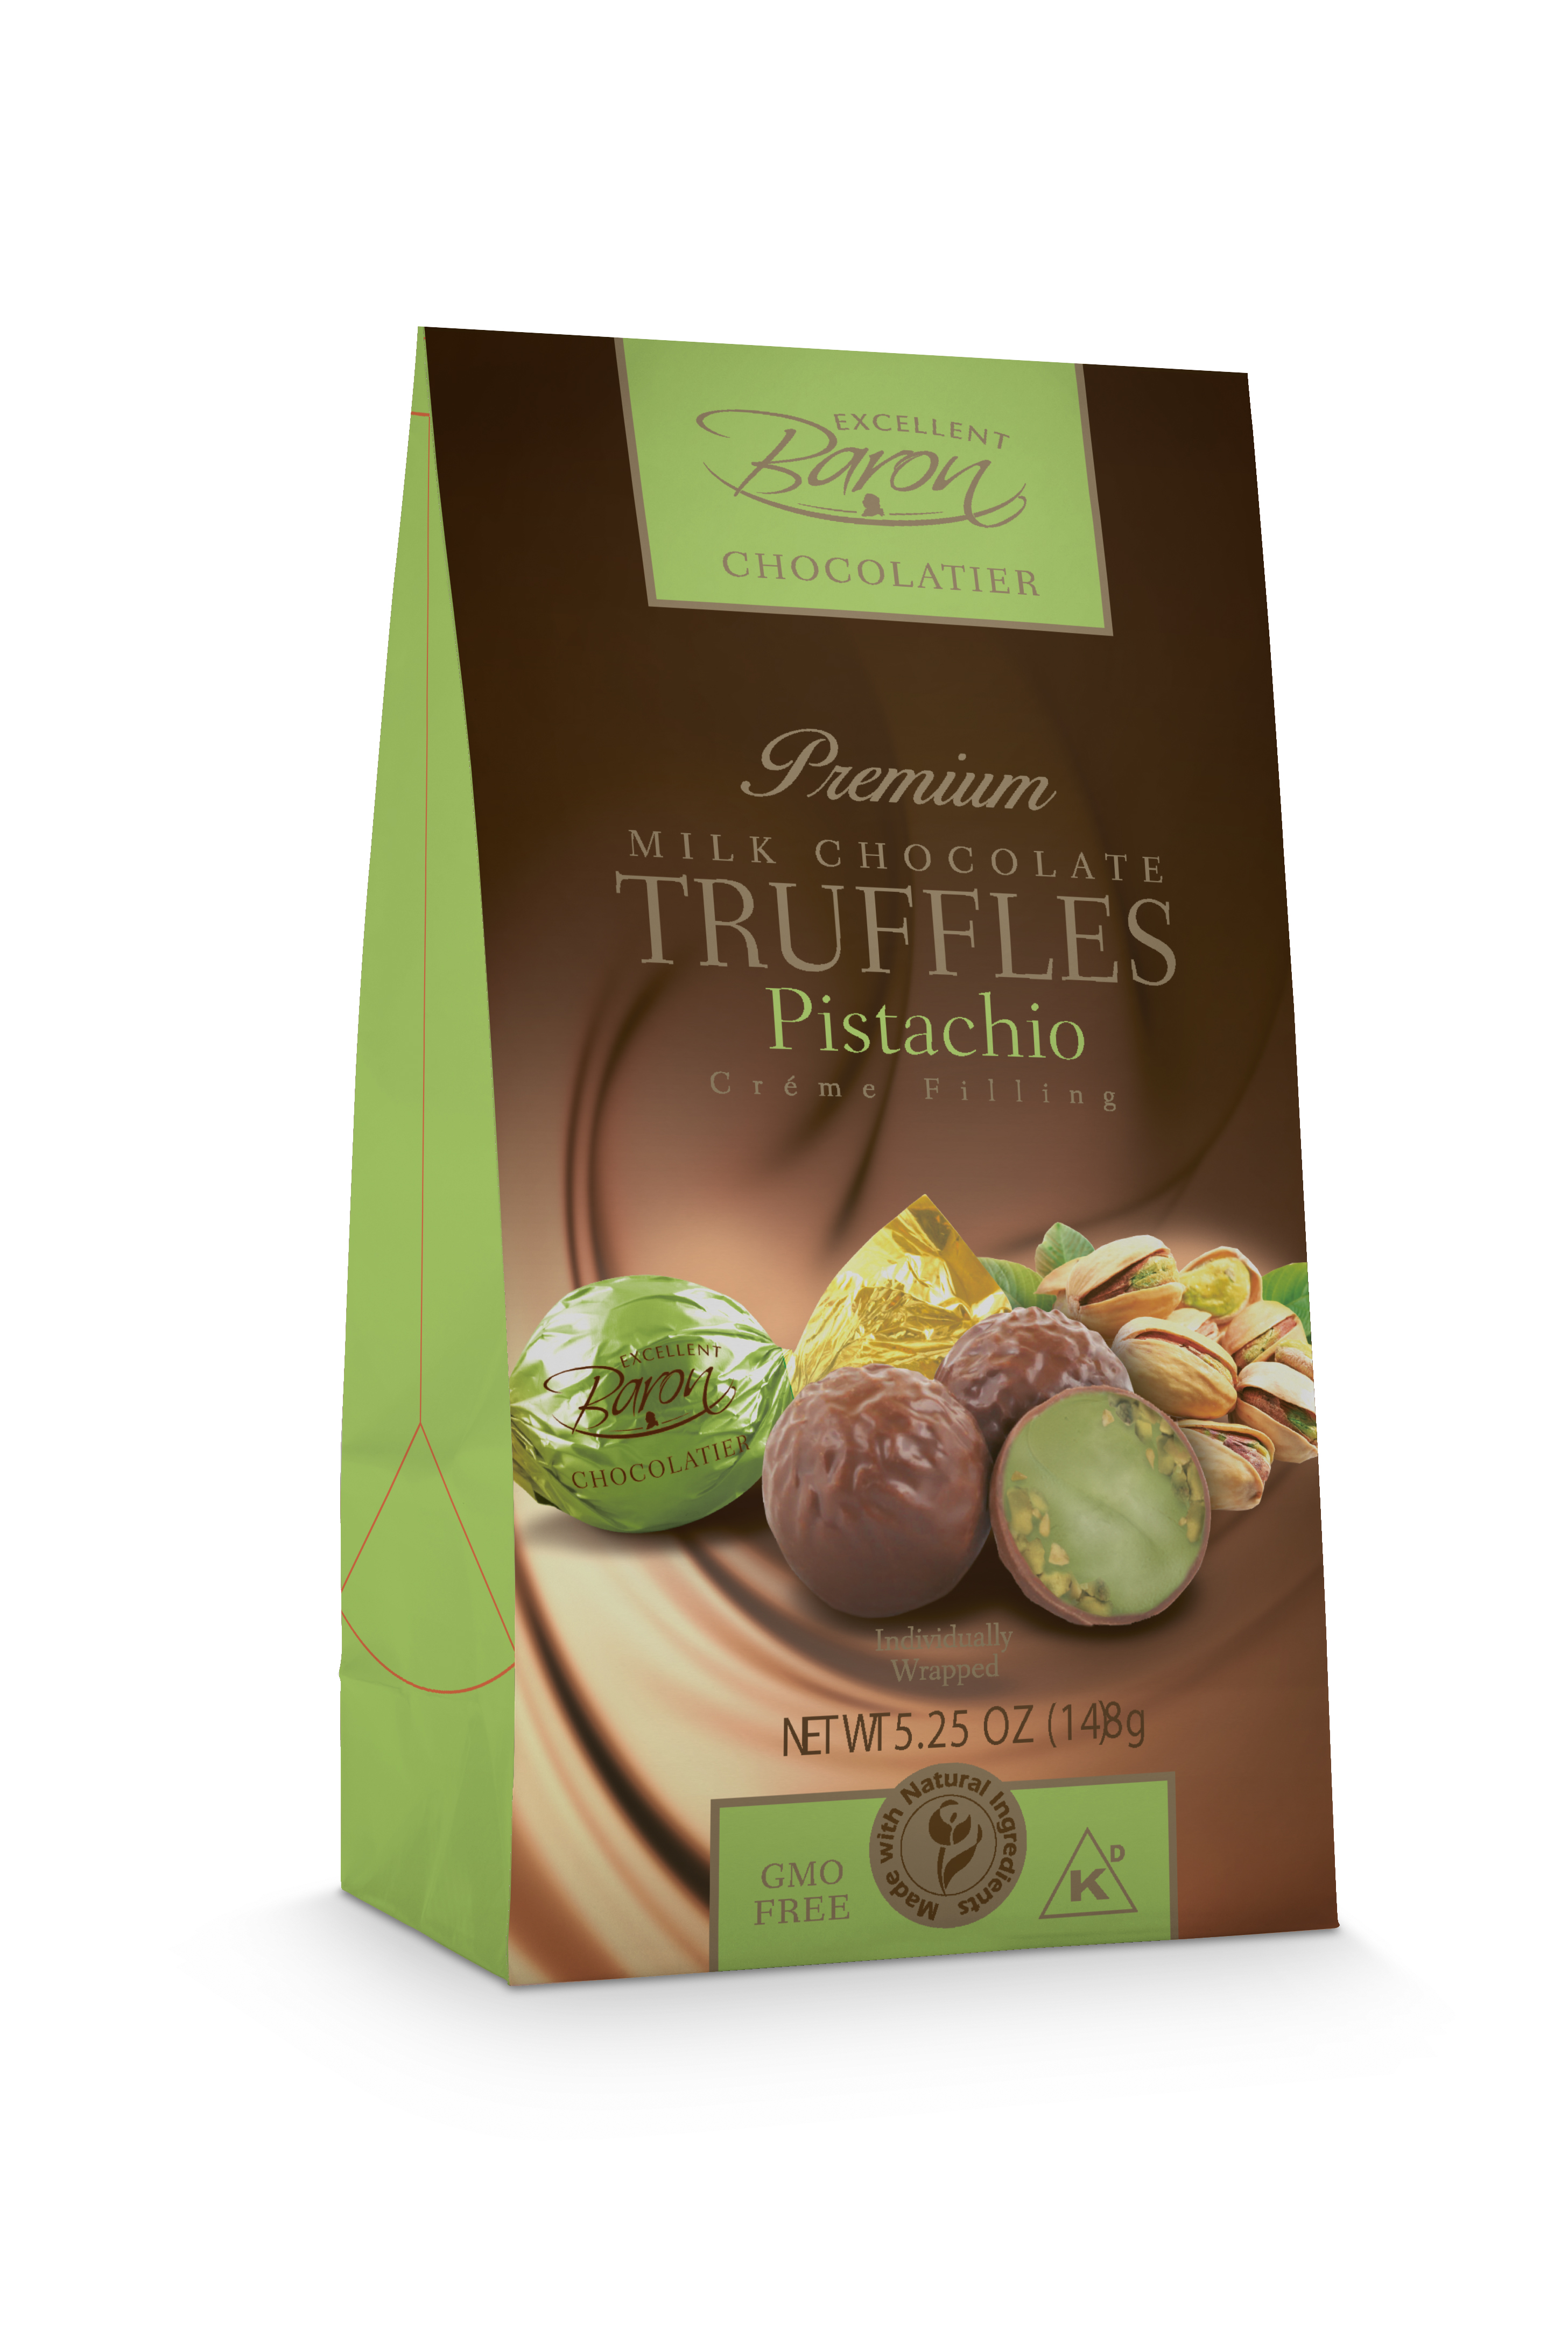 New Milk Chocolate with Pistachio Crème Filling by European Chocolate/ Milano (Excellent Baron Chocolatier)